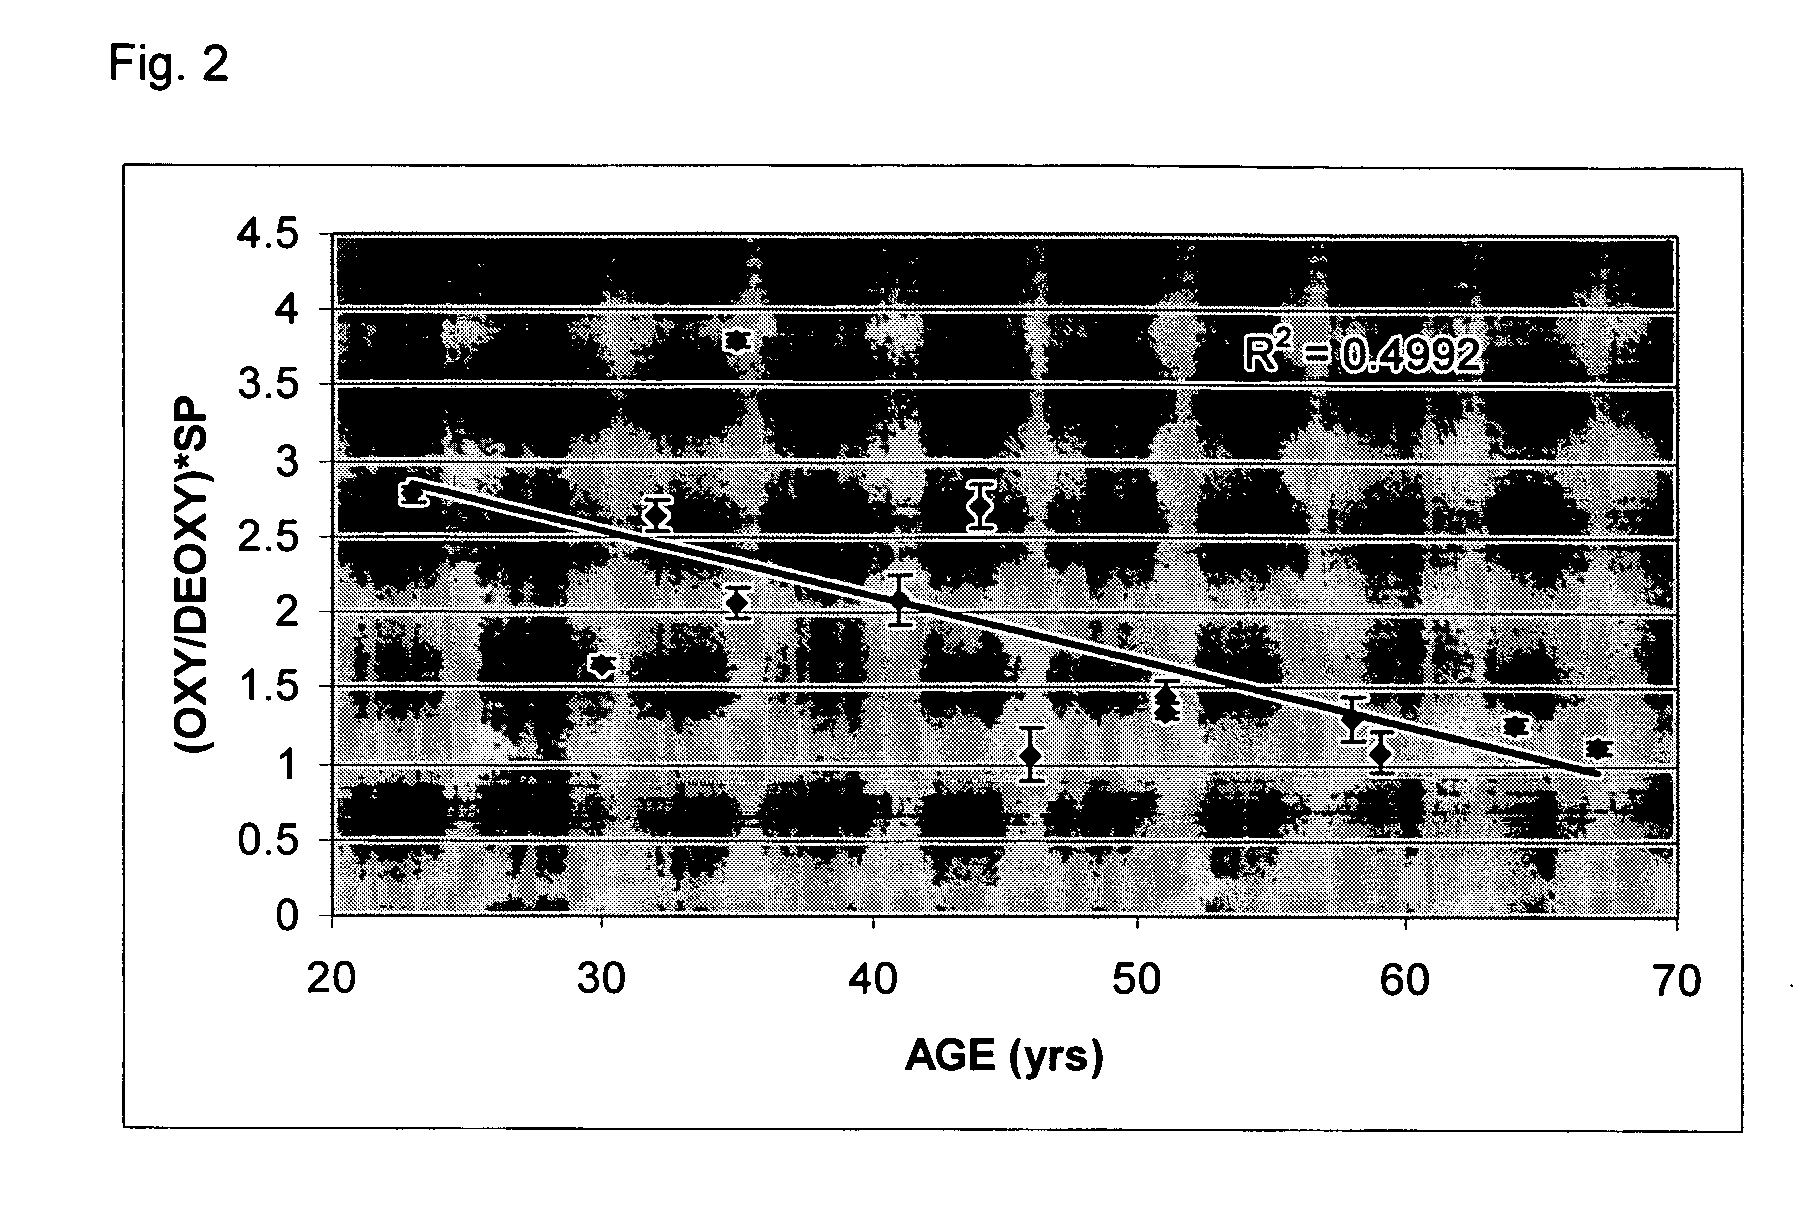 Method for assessing the condition of bone in-vivo